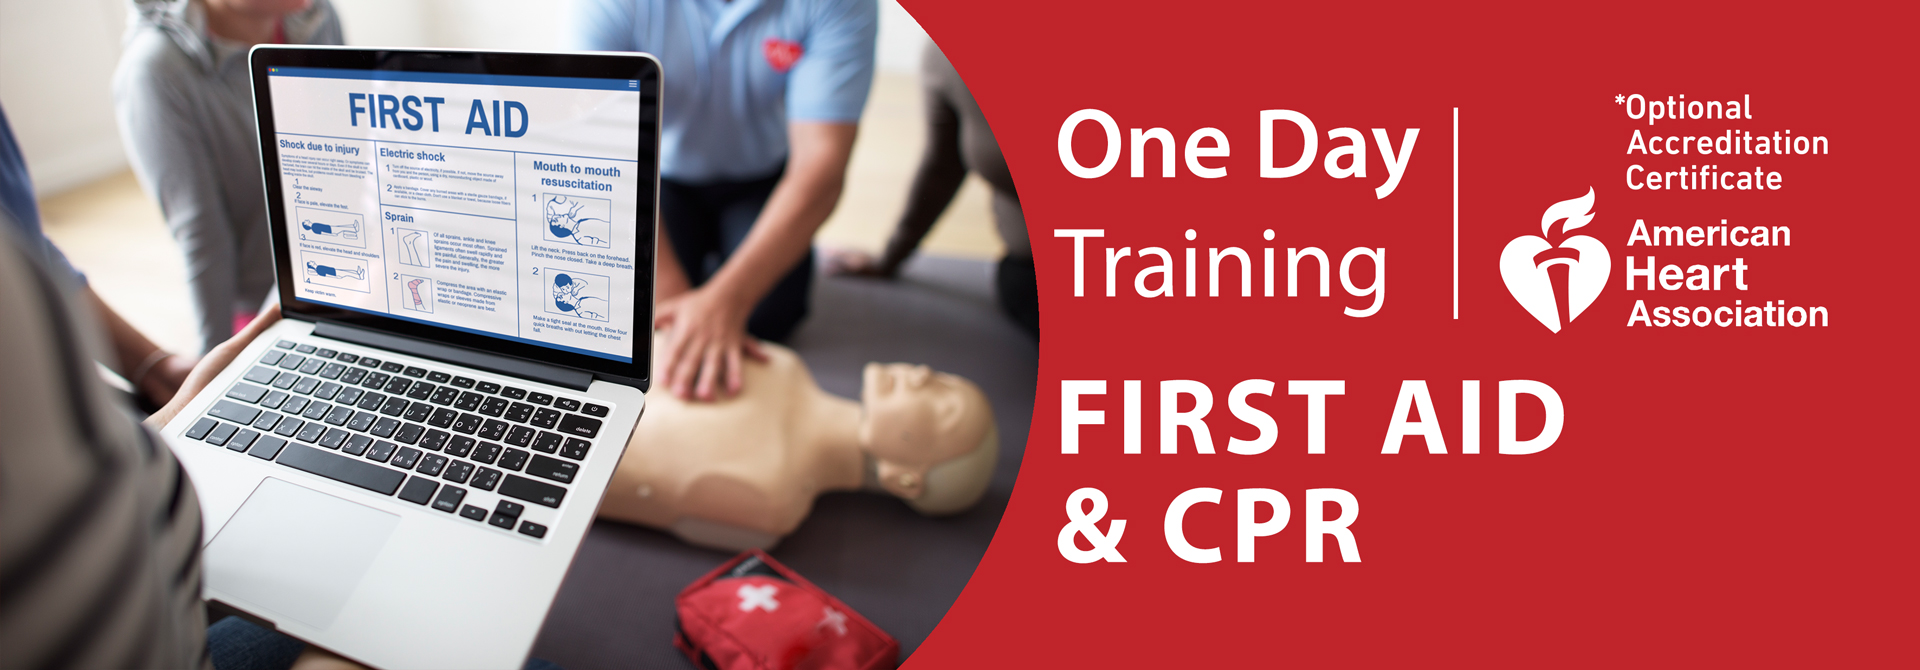 One Day Training FIRST AID & CPR